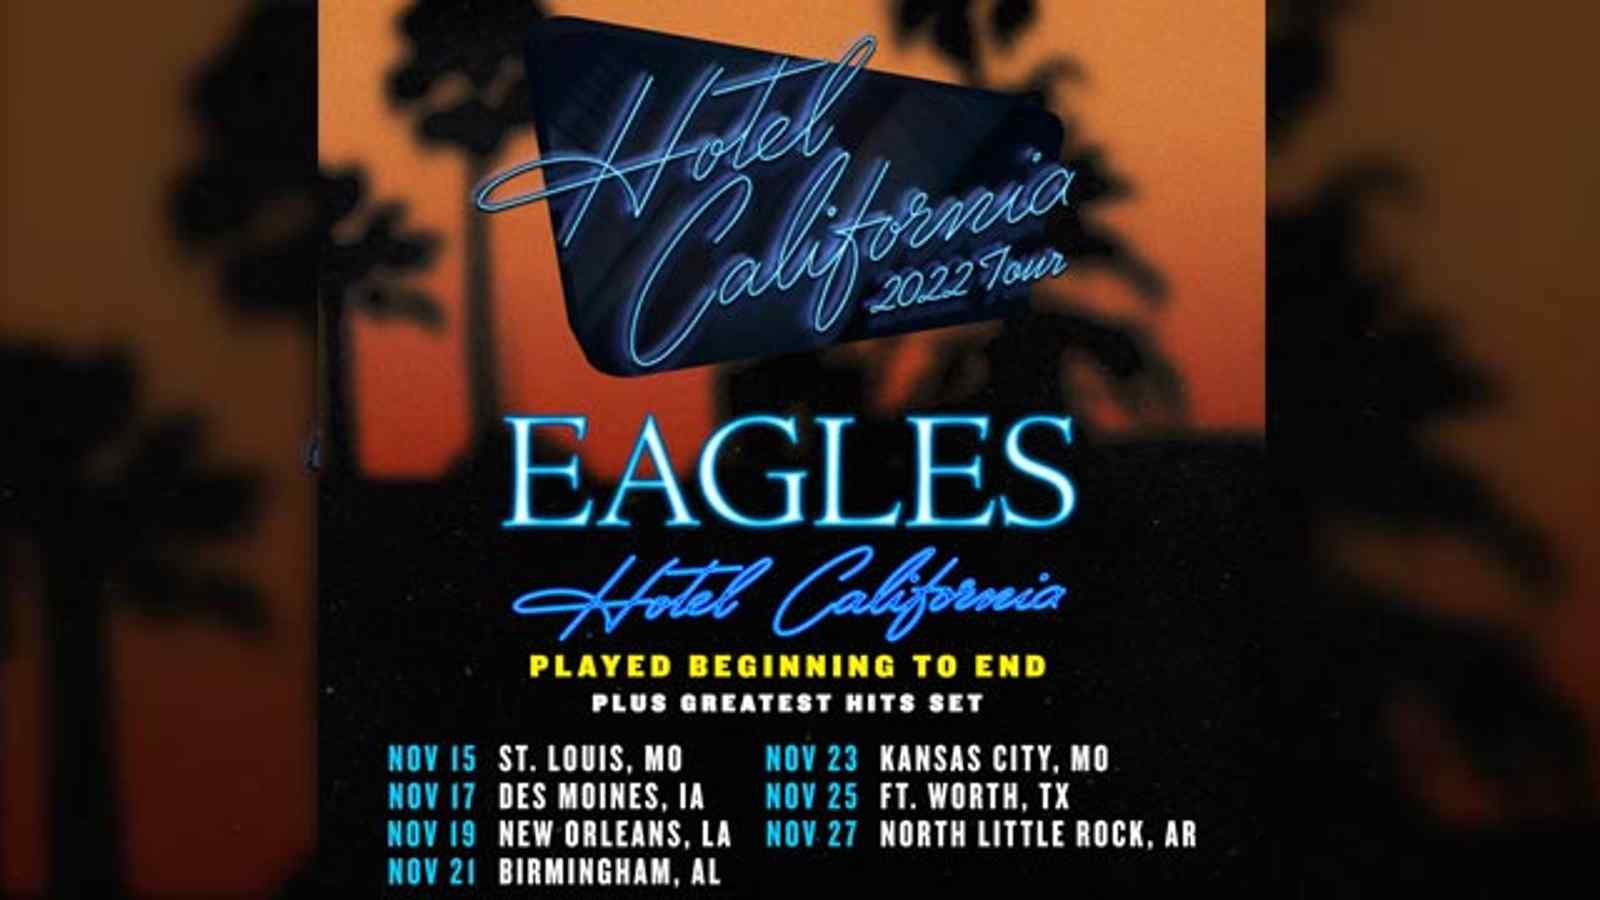 Additional Date Added to Eagles' Hotel California 2022 Tour